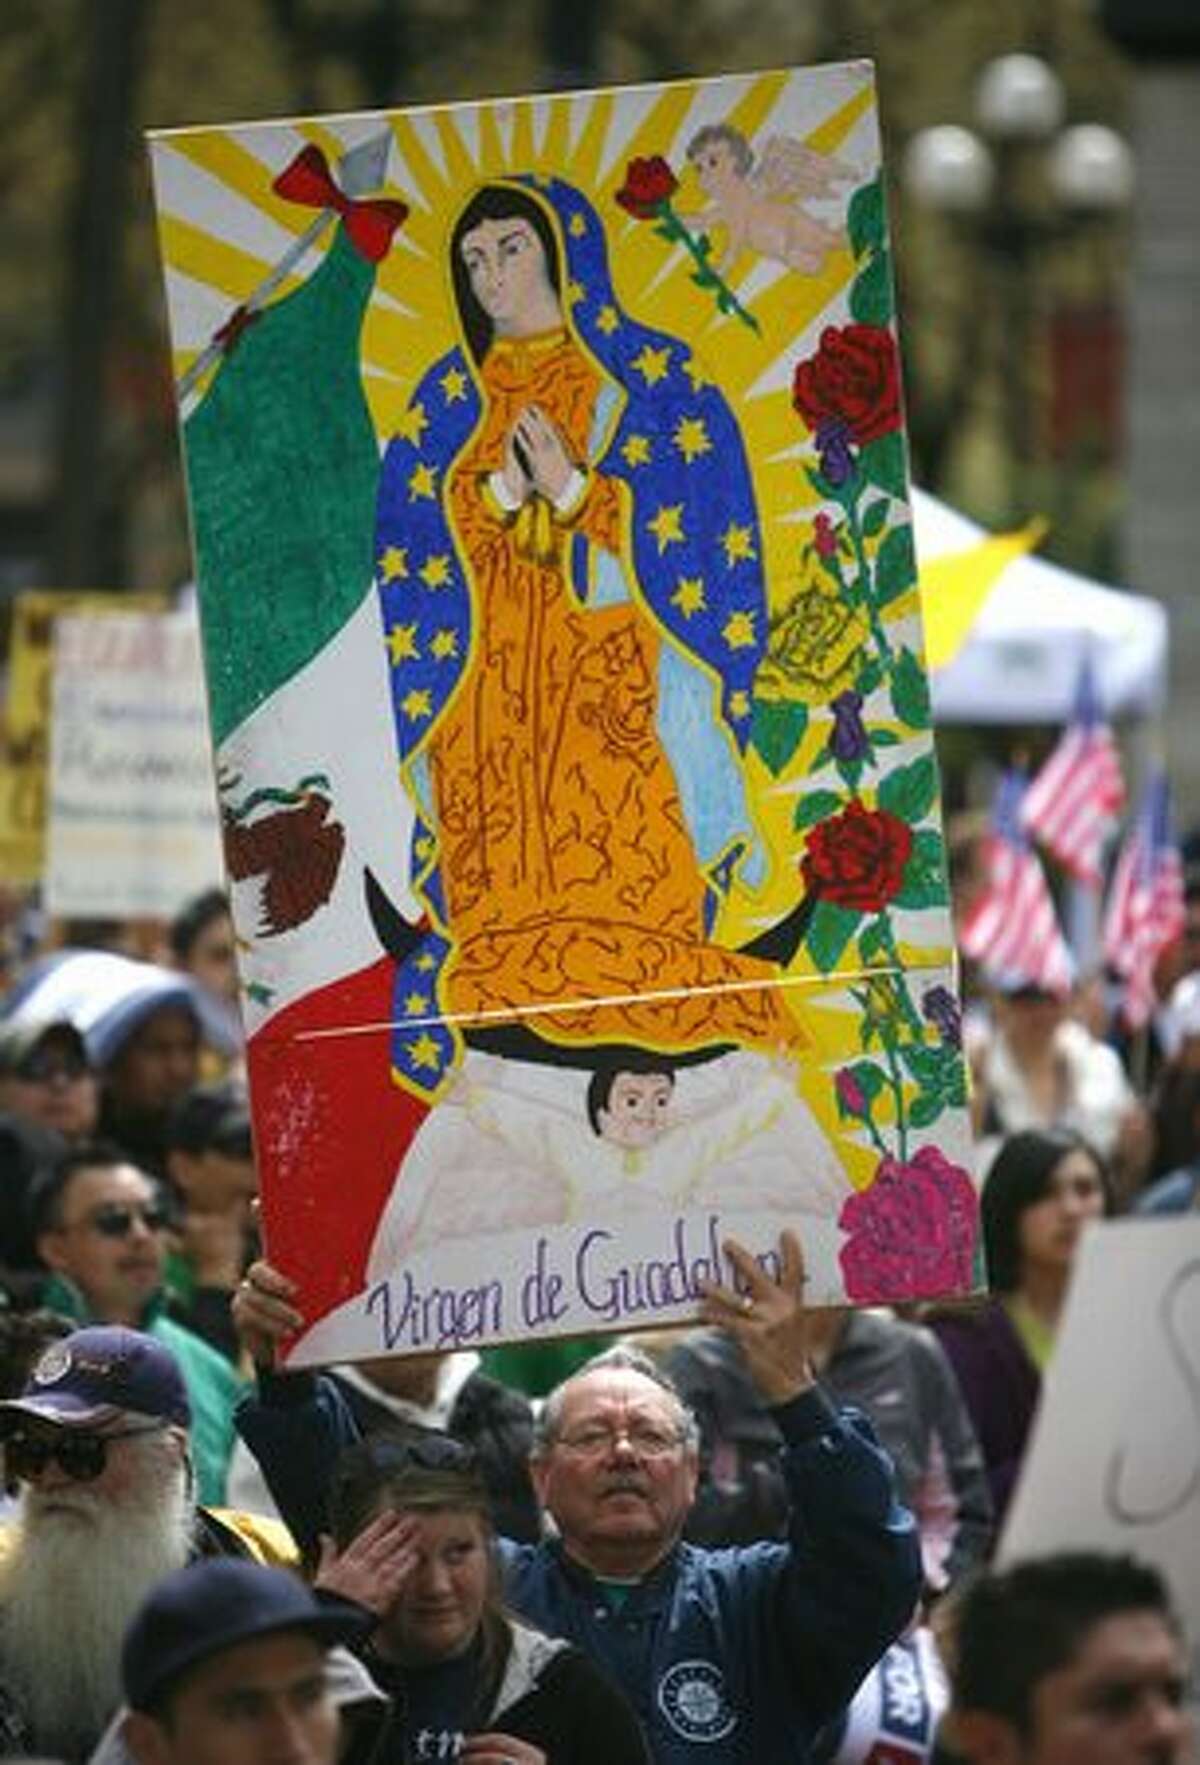 An estimated 7,000 people gather during an immigration reform rally in Seattle's Occidental Park on Saturday April 10, 2010. Speaker Pramila Jayapal, executive director of OneAmerica, said her organization is demanding that a bill be introduced in congress for immigration reform by May 1st.